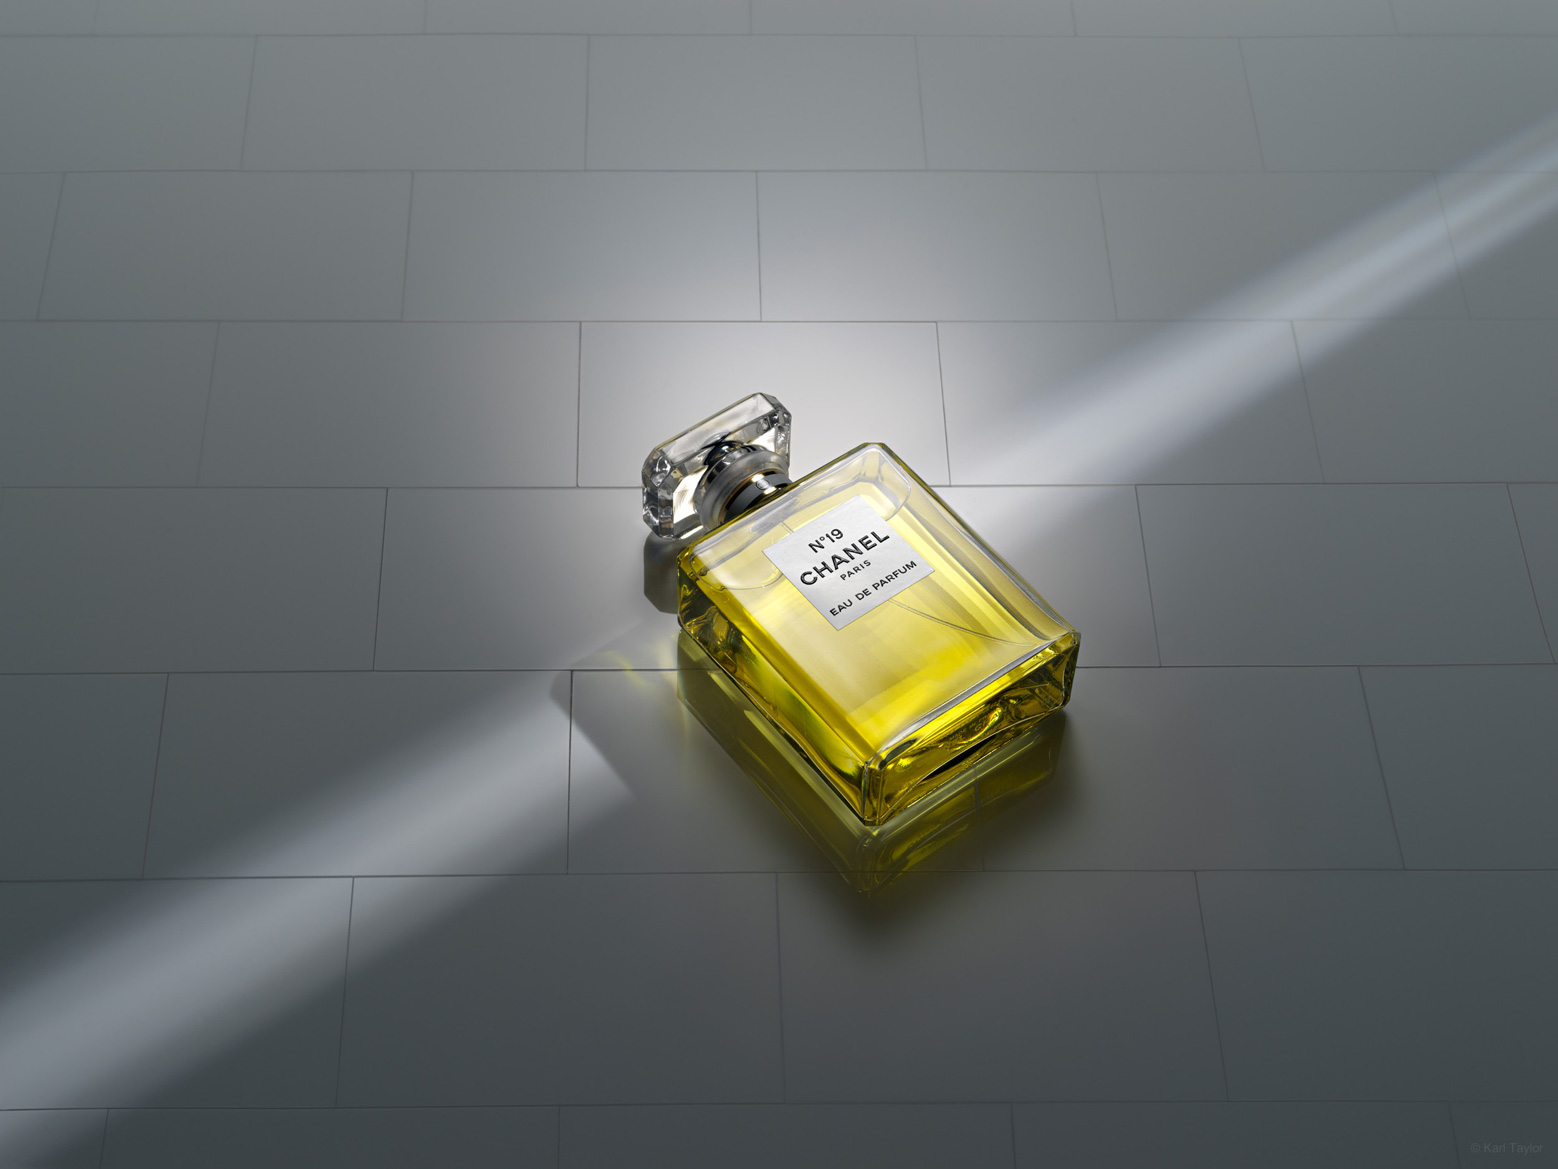 Chanel No.19 perfume bottle in ray of light